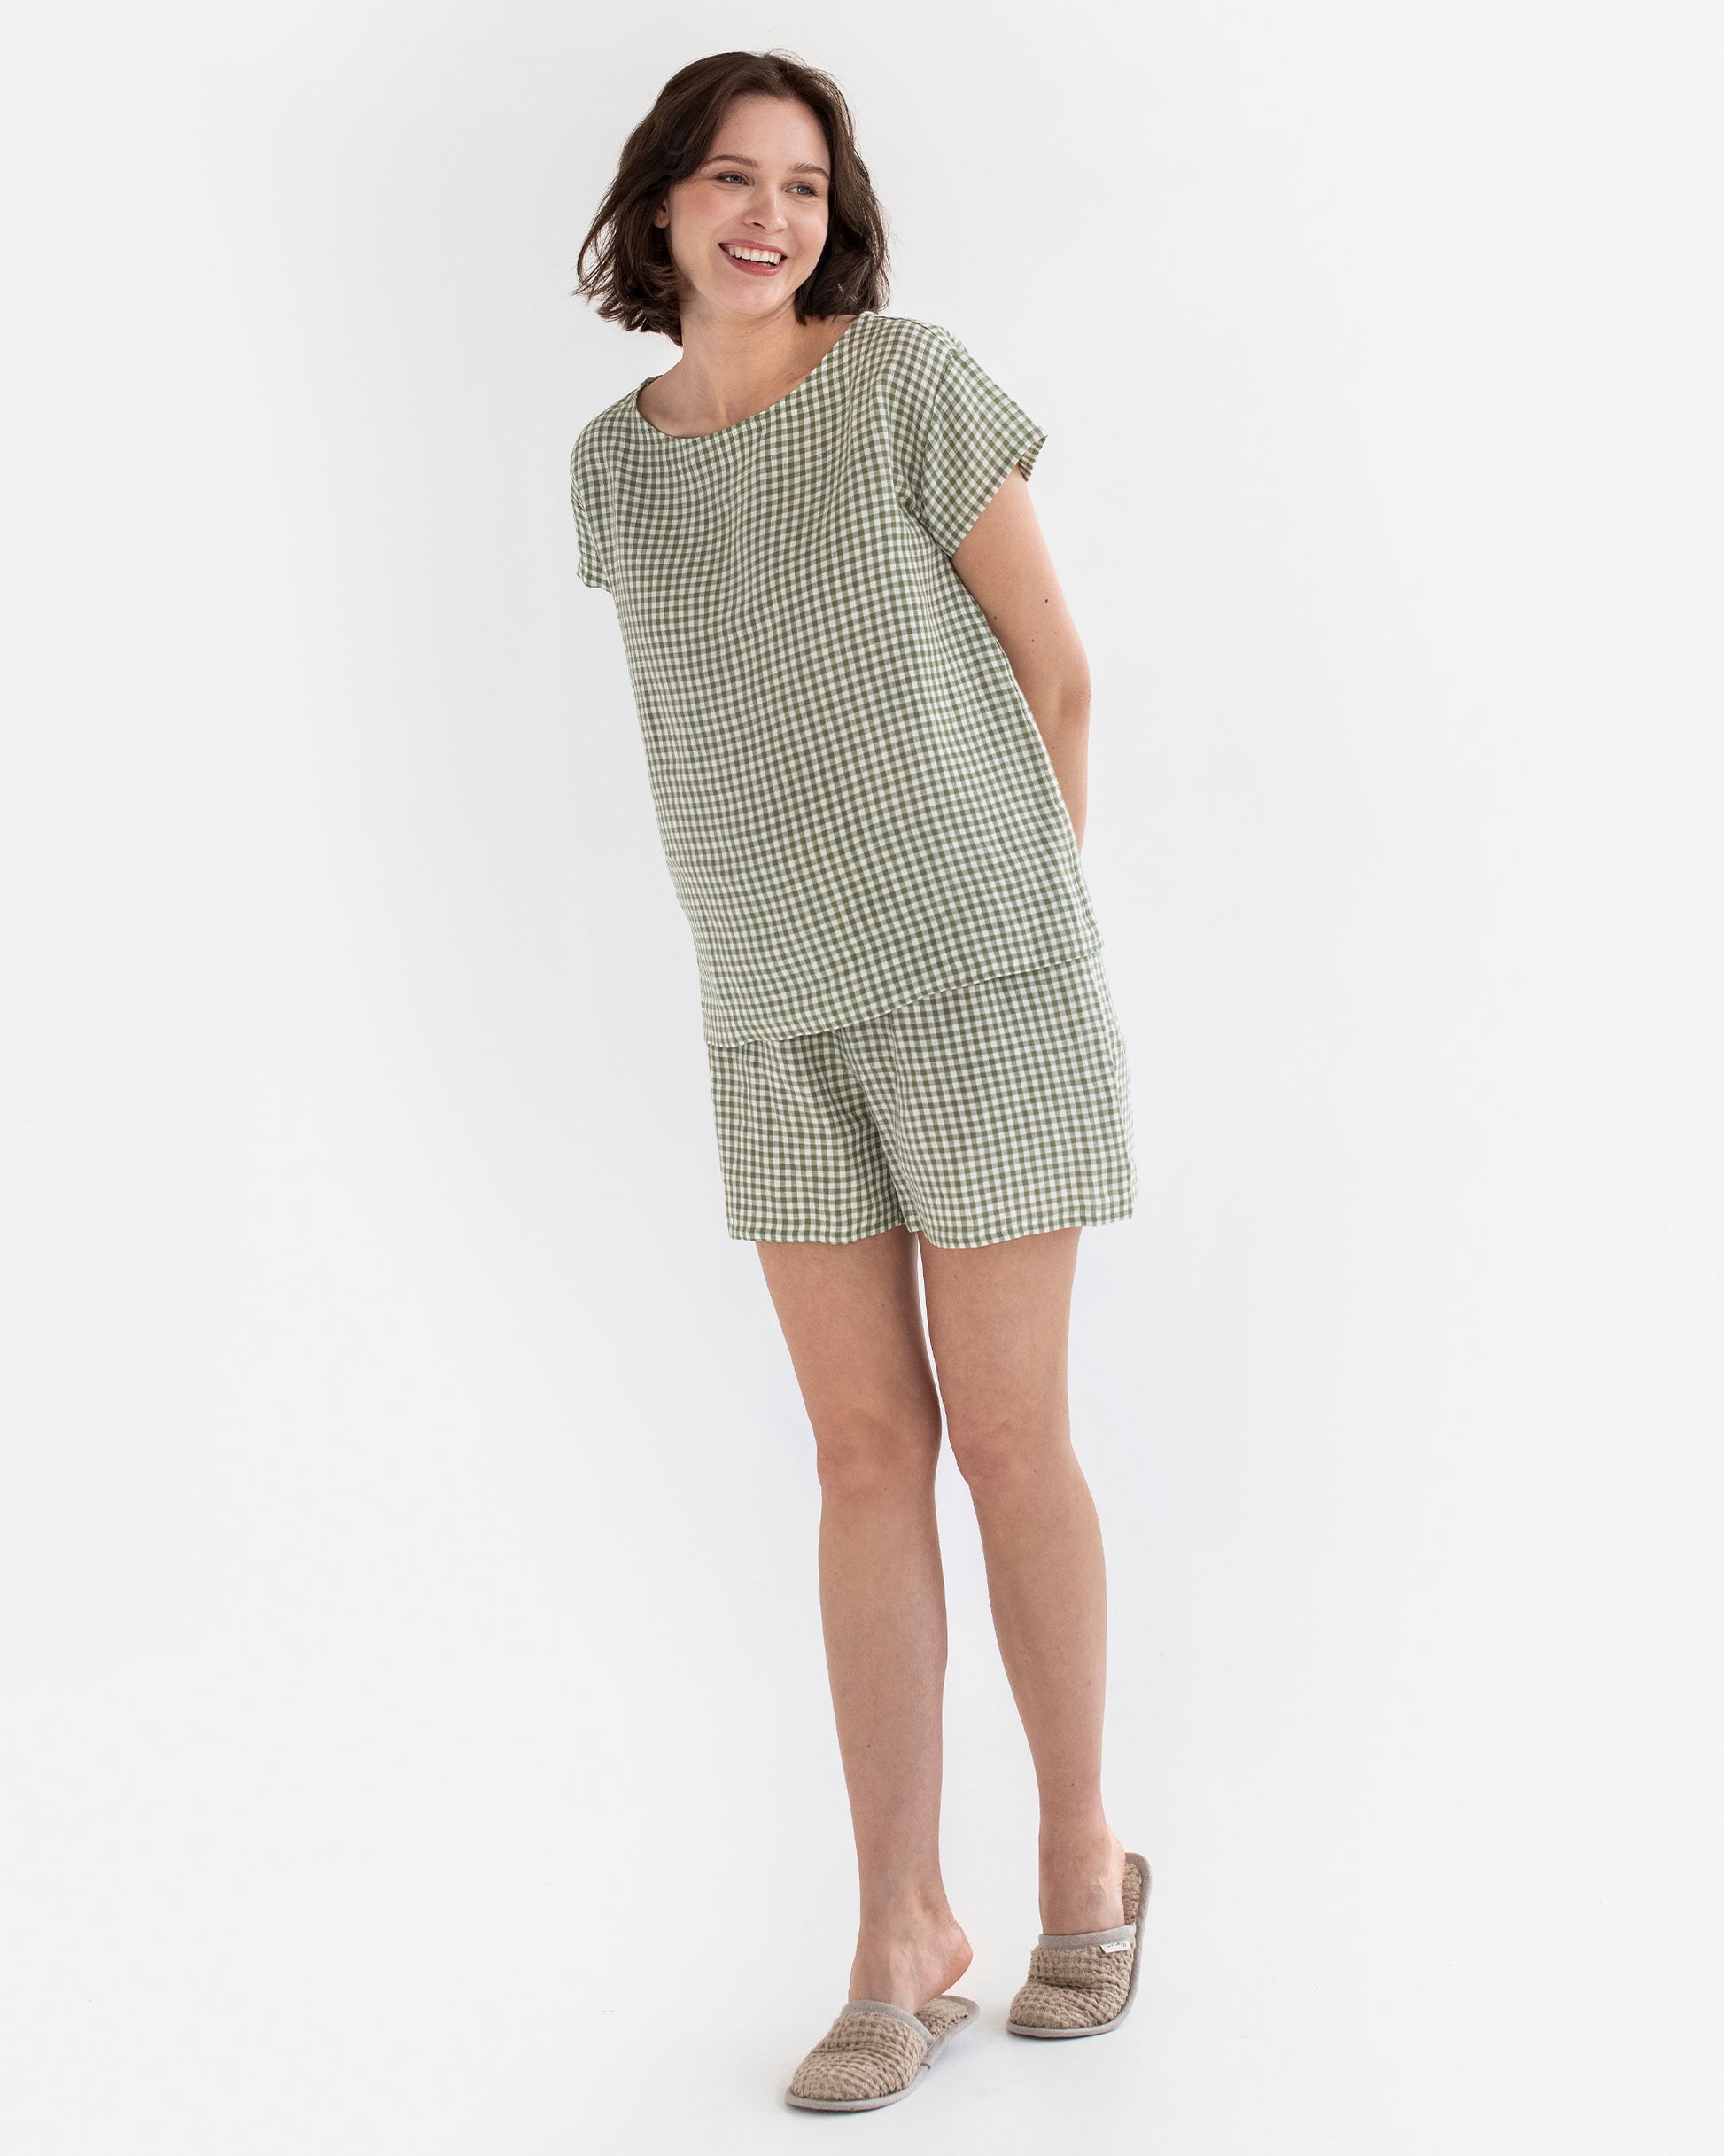 Linen pajama set Luni in Forest green gingham - MagicLinen